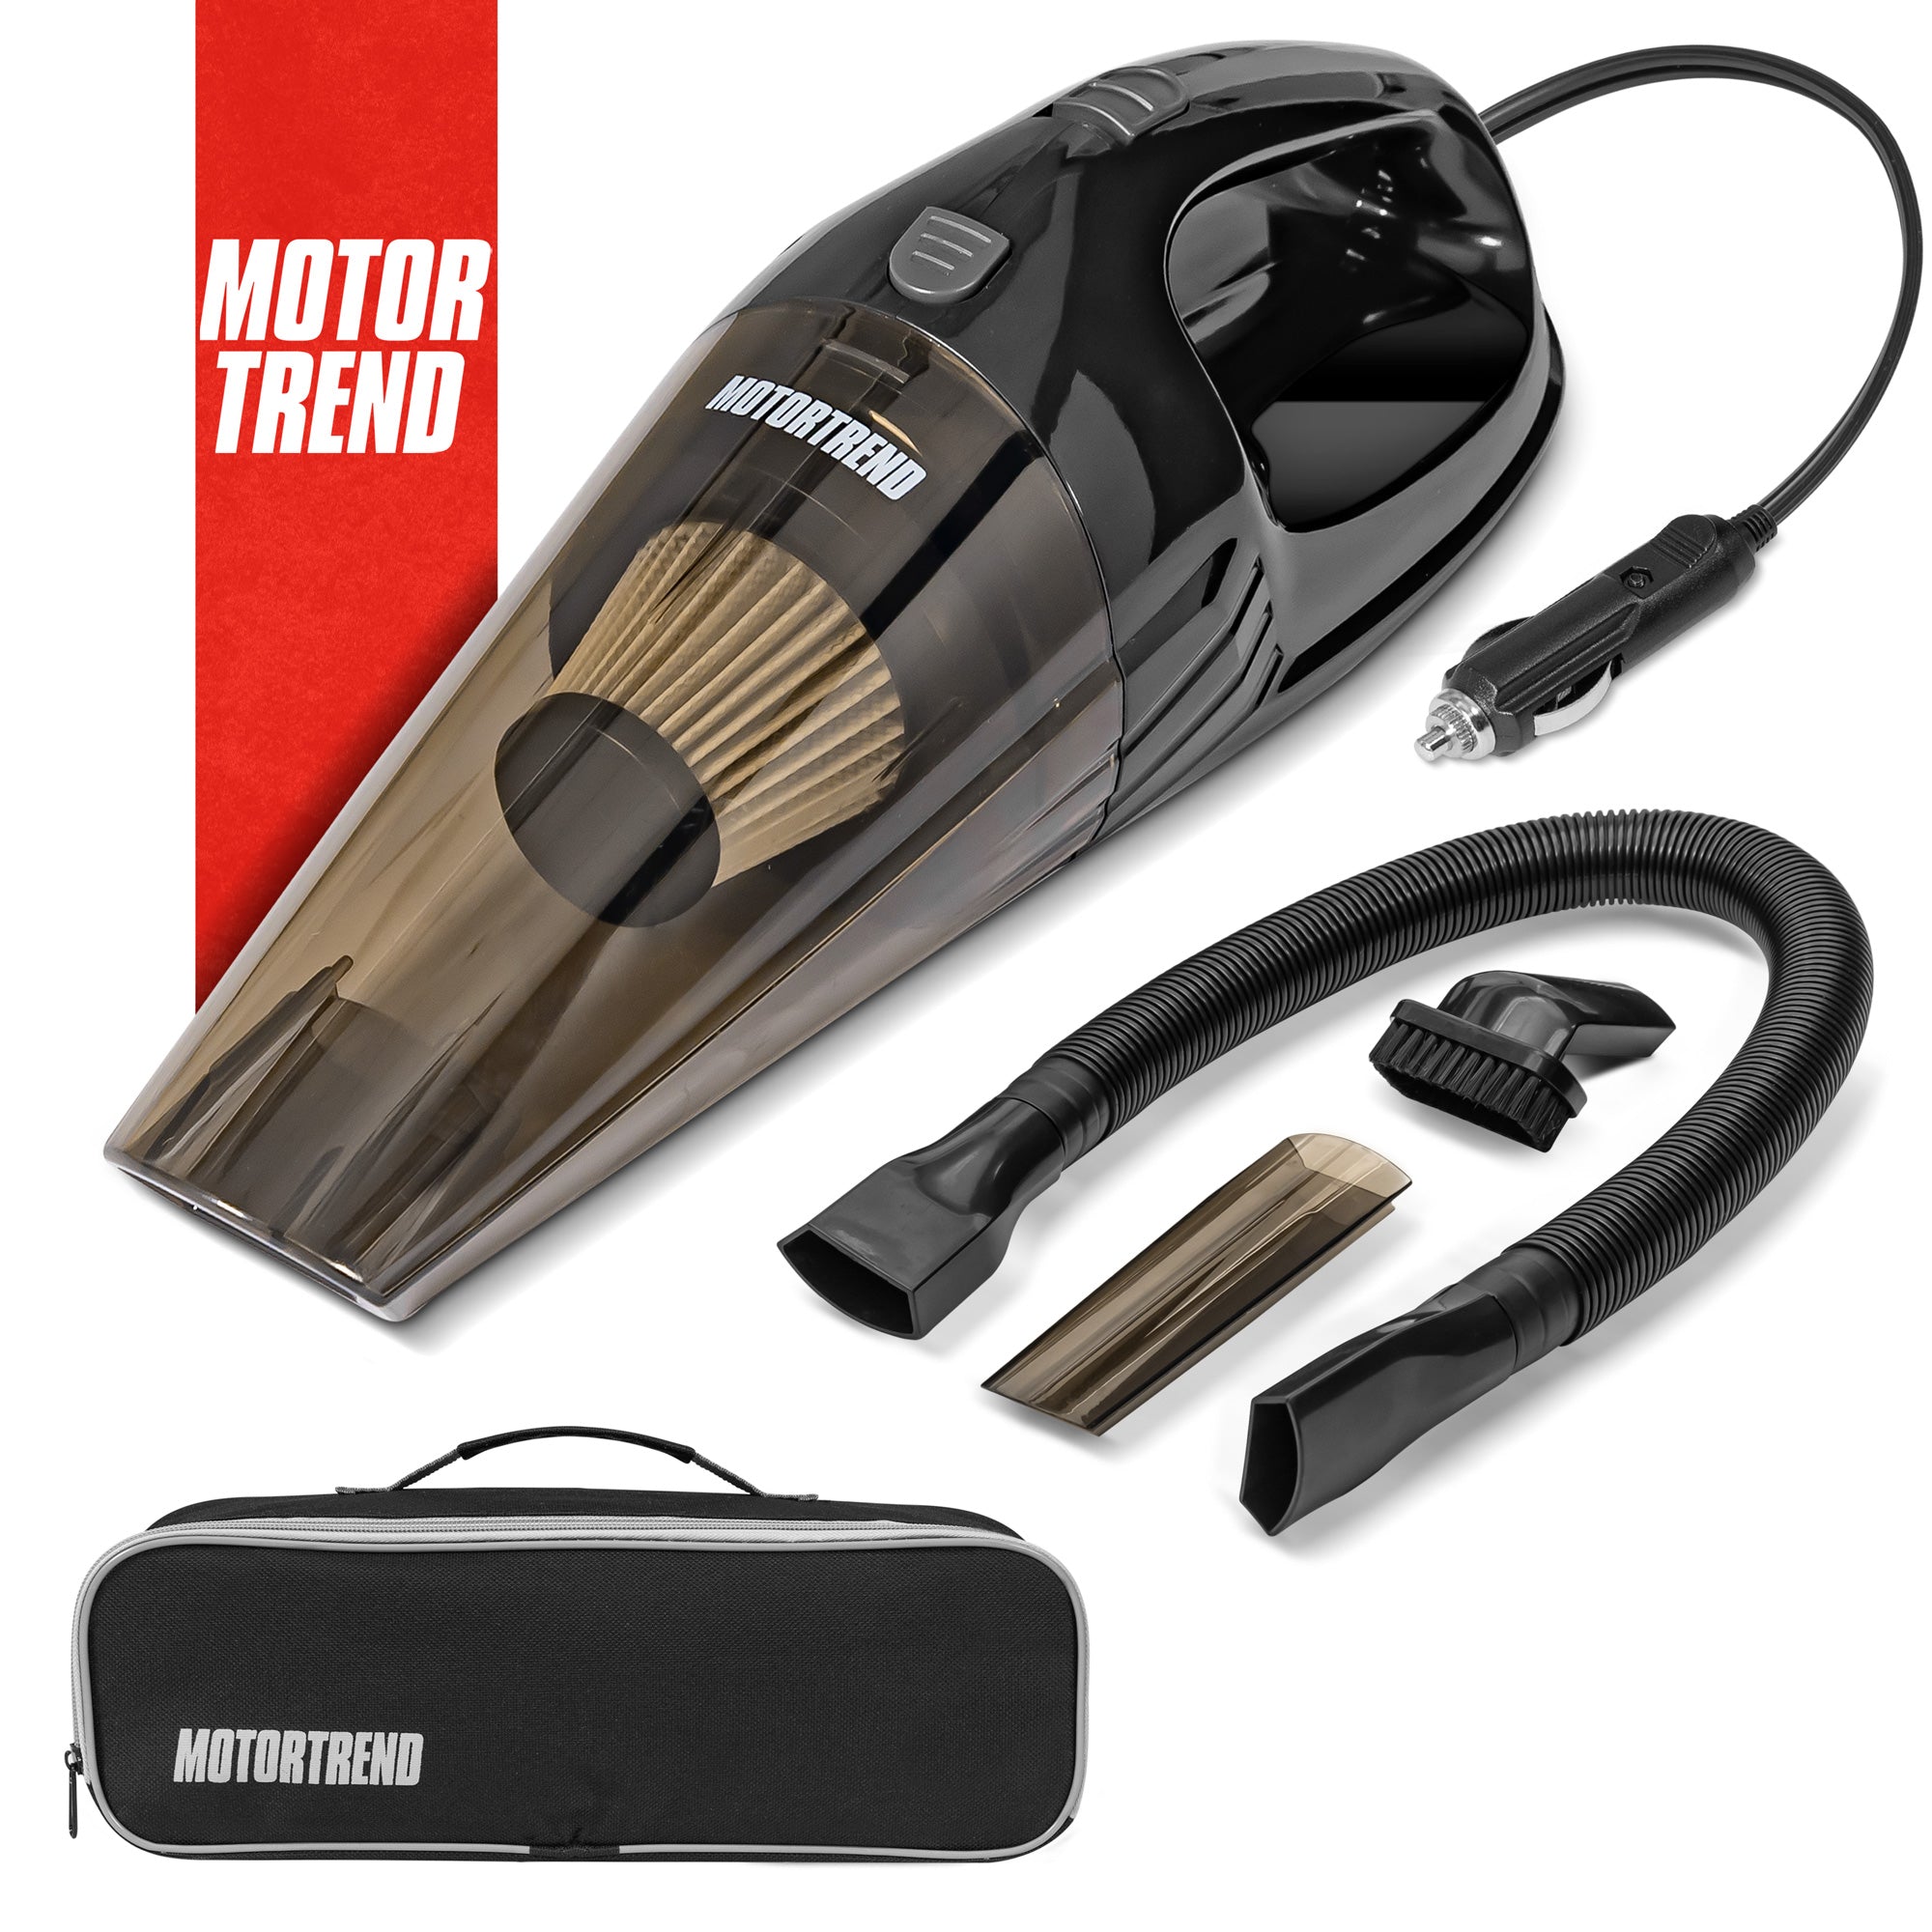 Lightweight & Portable Handheld Car Vacuum Cleaner Interior Cleaning Wet or Dry Mess Includes 3 Accessories + Filter & Carrying Bag Powerful Suction 15 Ft Extra Long Cord